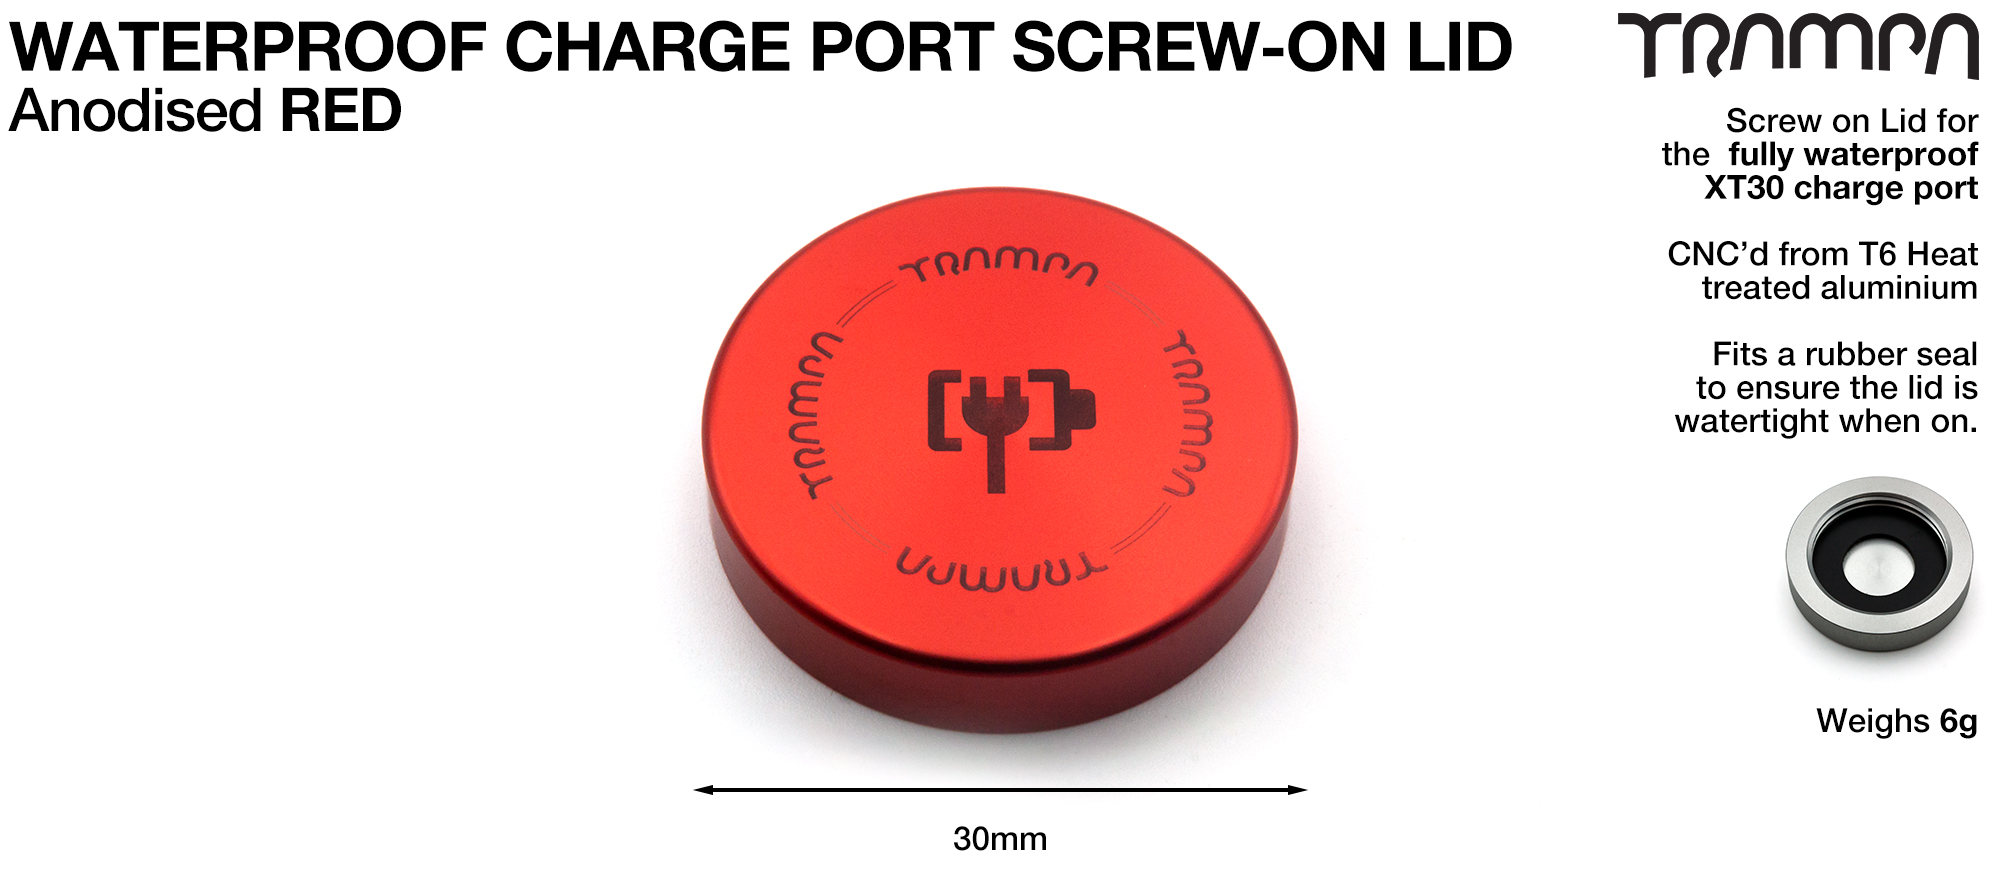 Charge Point TOP - Anodised RED